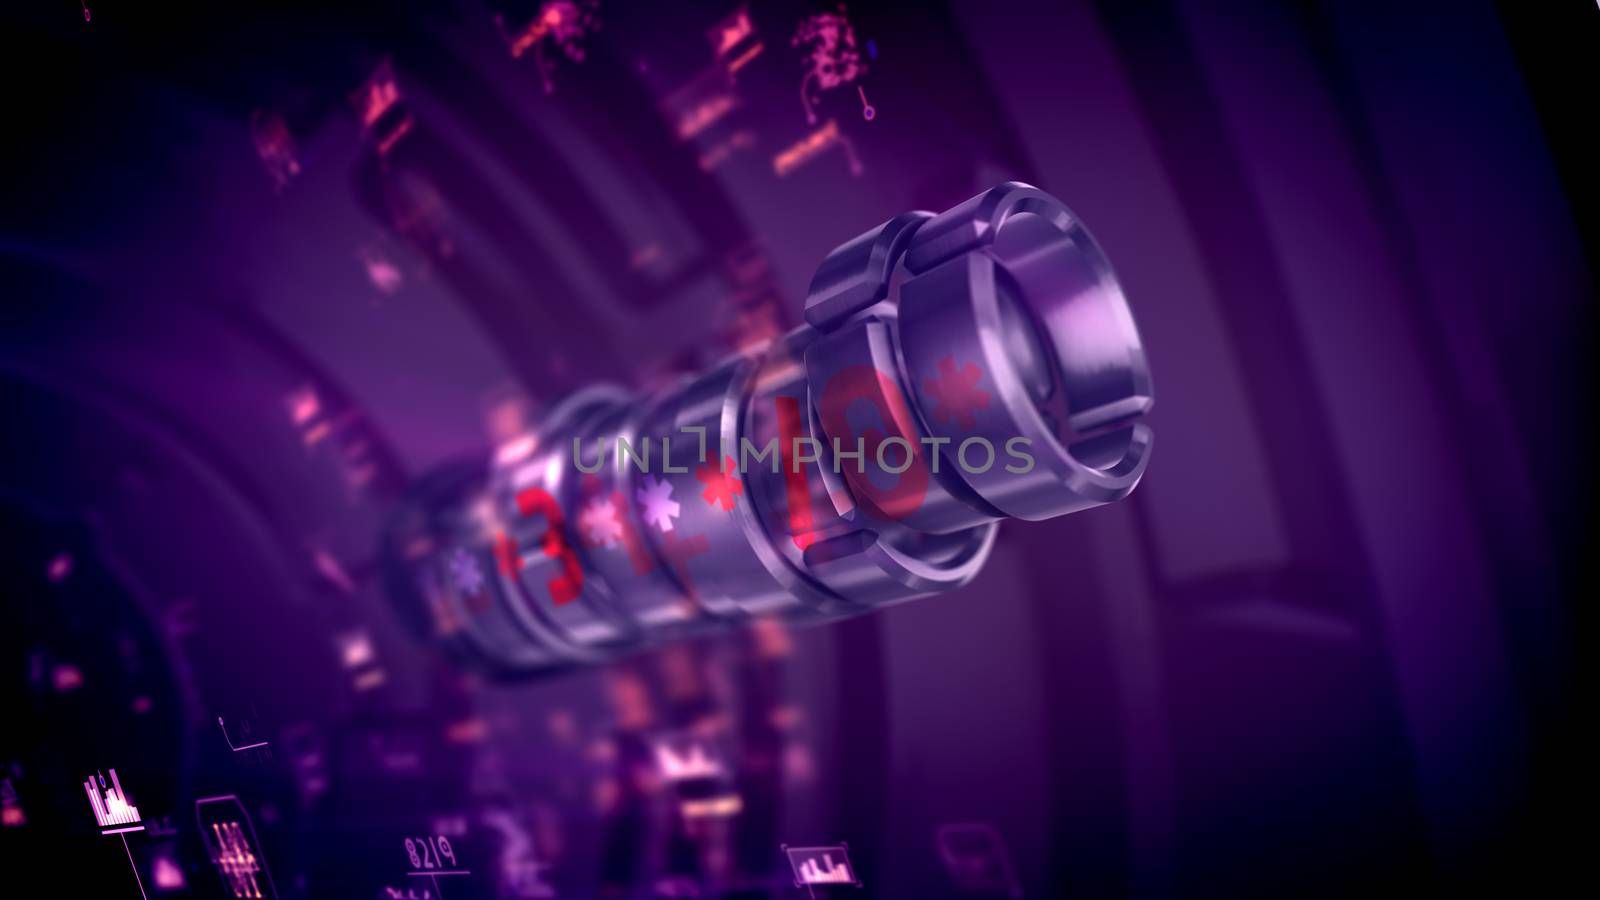 Artistic 3d illustration of a metallic password forcer from several cylinders with six-angled stars, and curvy ribs around in blurred violet backdrop. It looks futuristic and hi-tech.